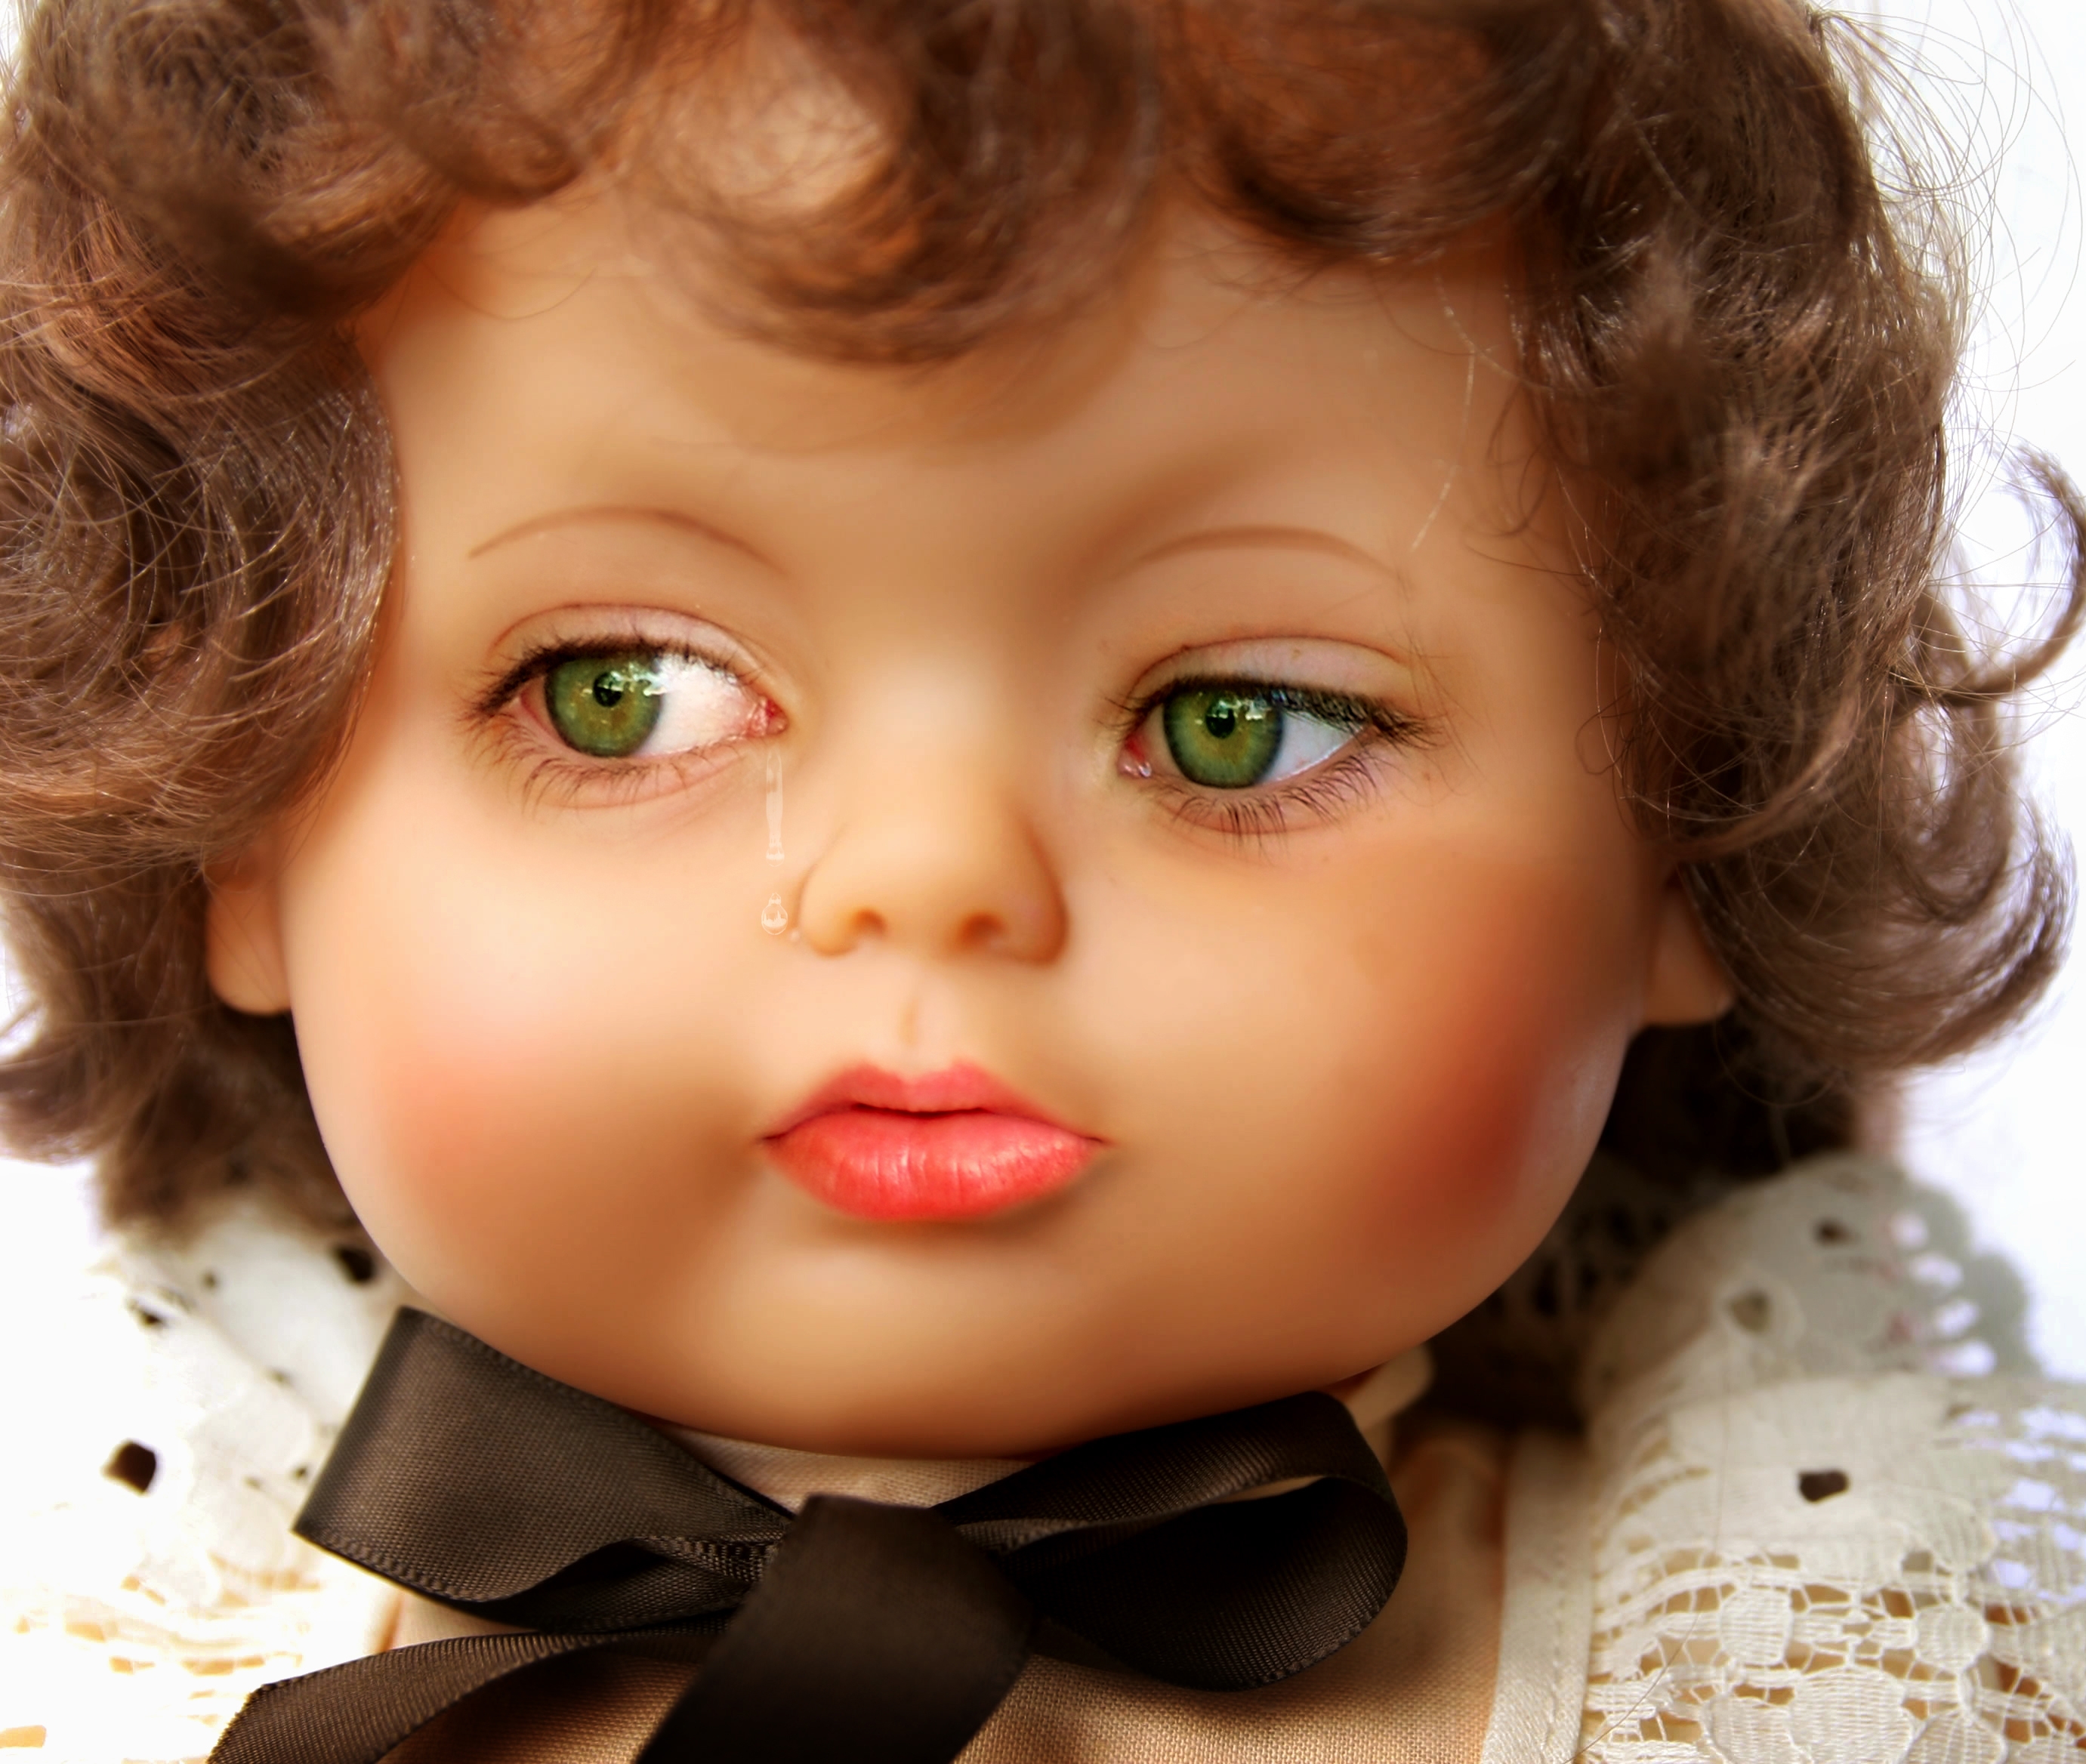 Amazing Dollface Pictures & Backgrounds